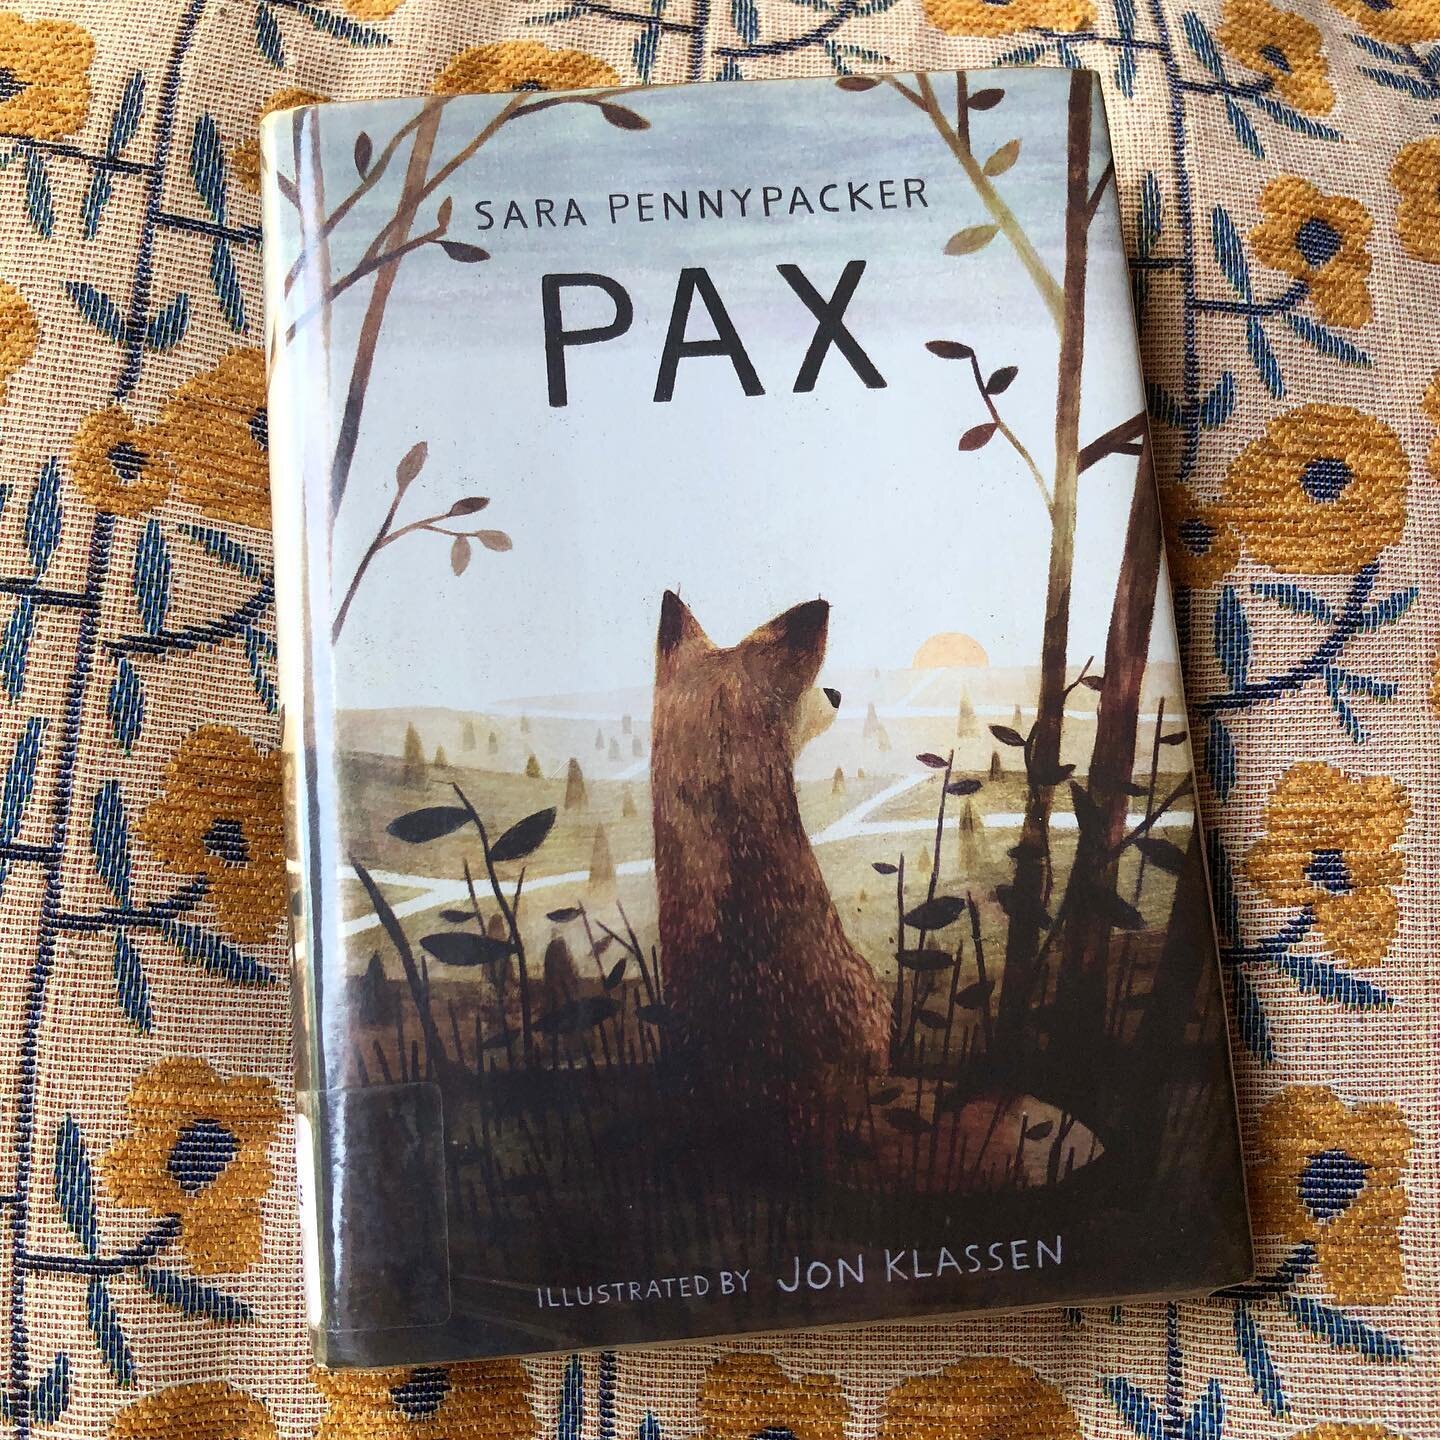 Just finished up this really lovely book. Such fabulous characters, and you can tell the writer spent so much time researching foxes so she would know just how it might be to be one. There&rsquo;s also this hermit character that I admire possibly too